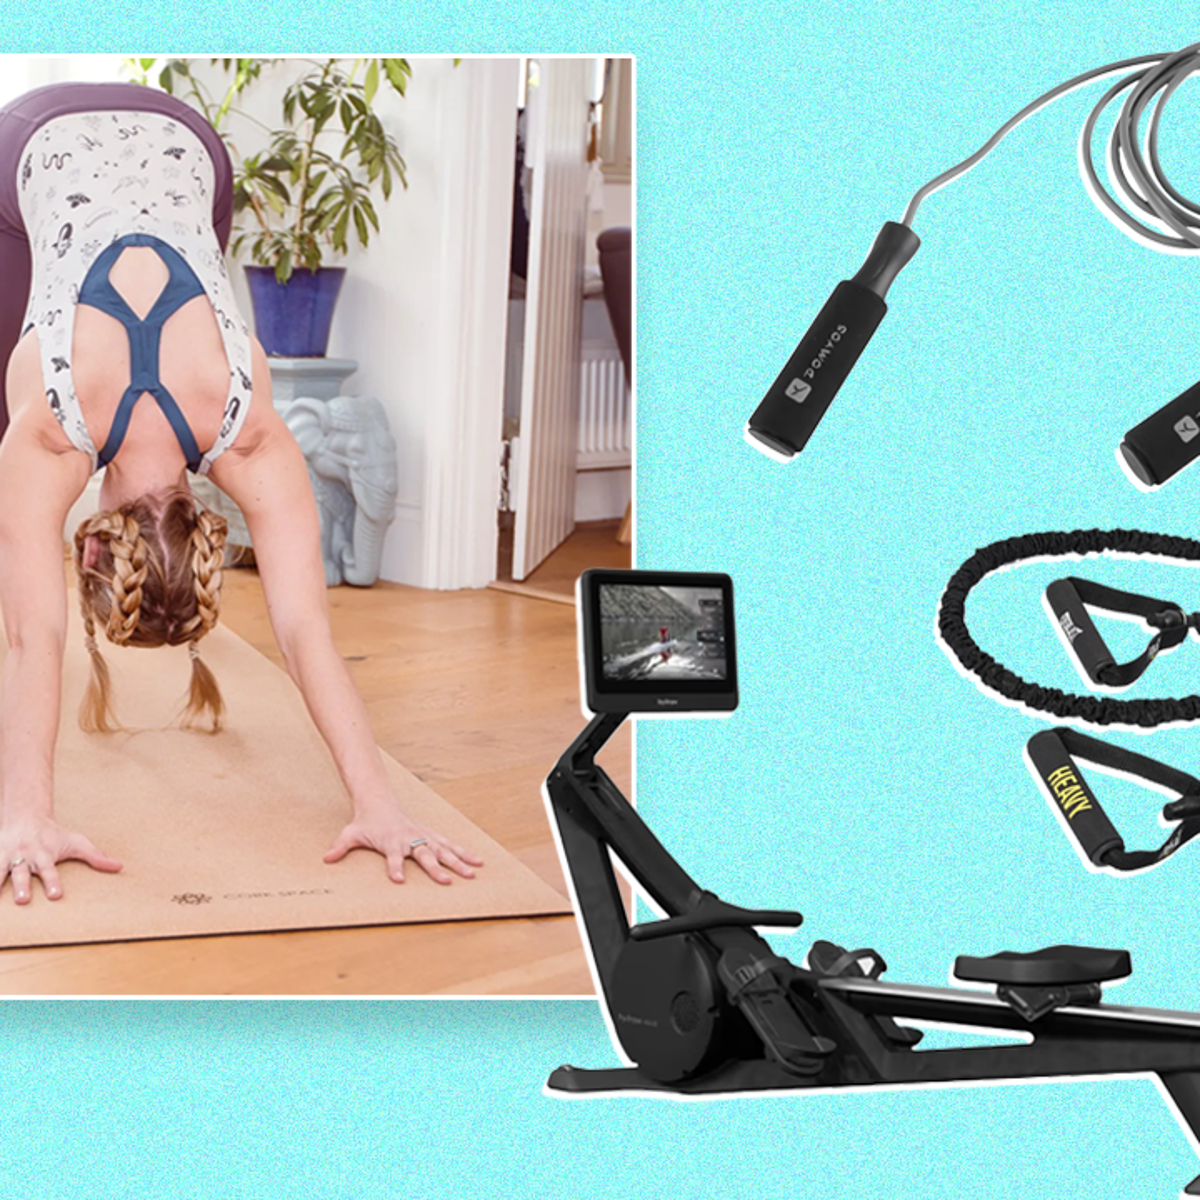 13 Pieces of Functional Home Gym Equipment That Put Design First